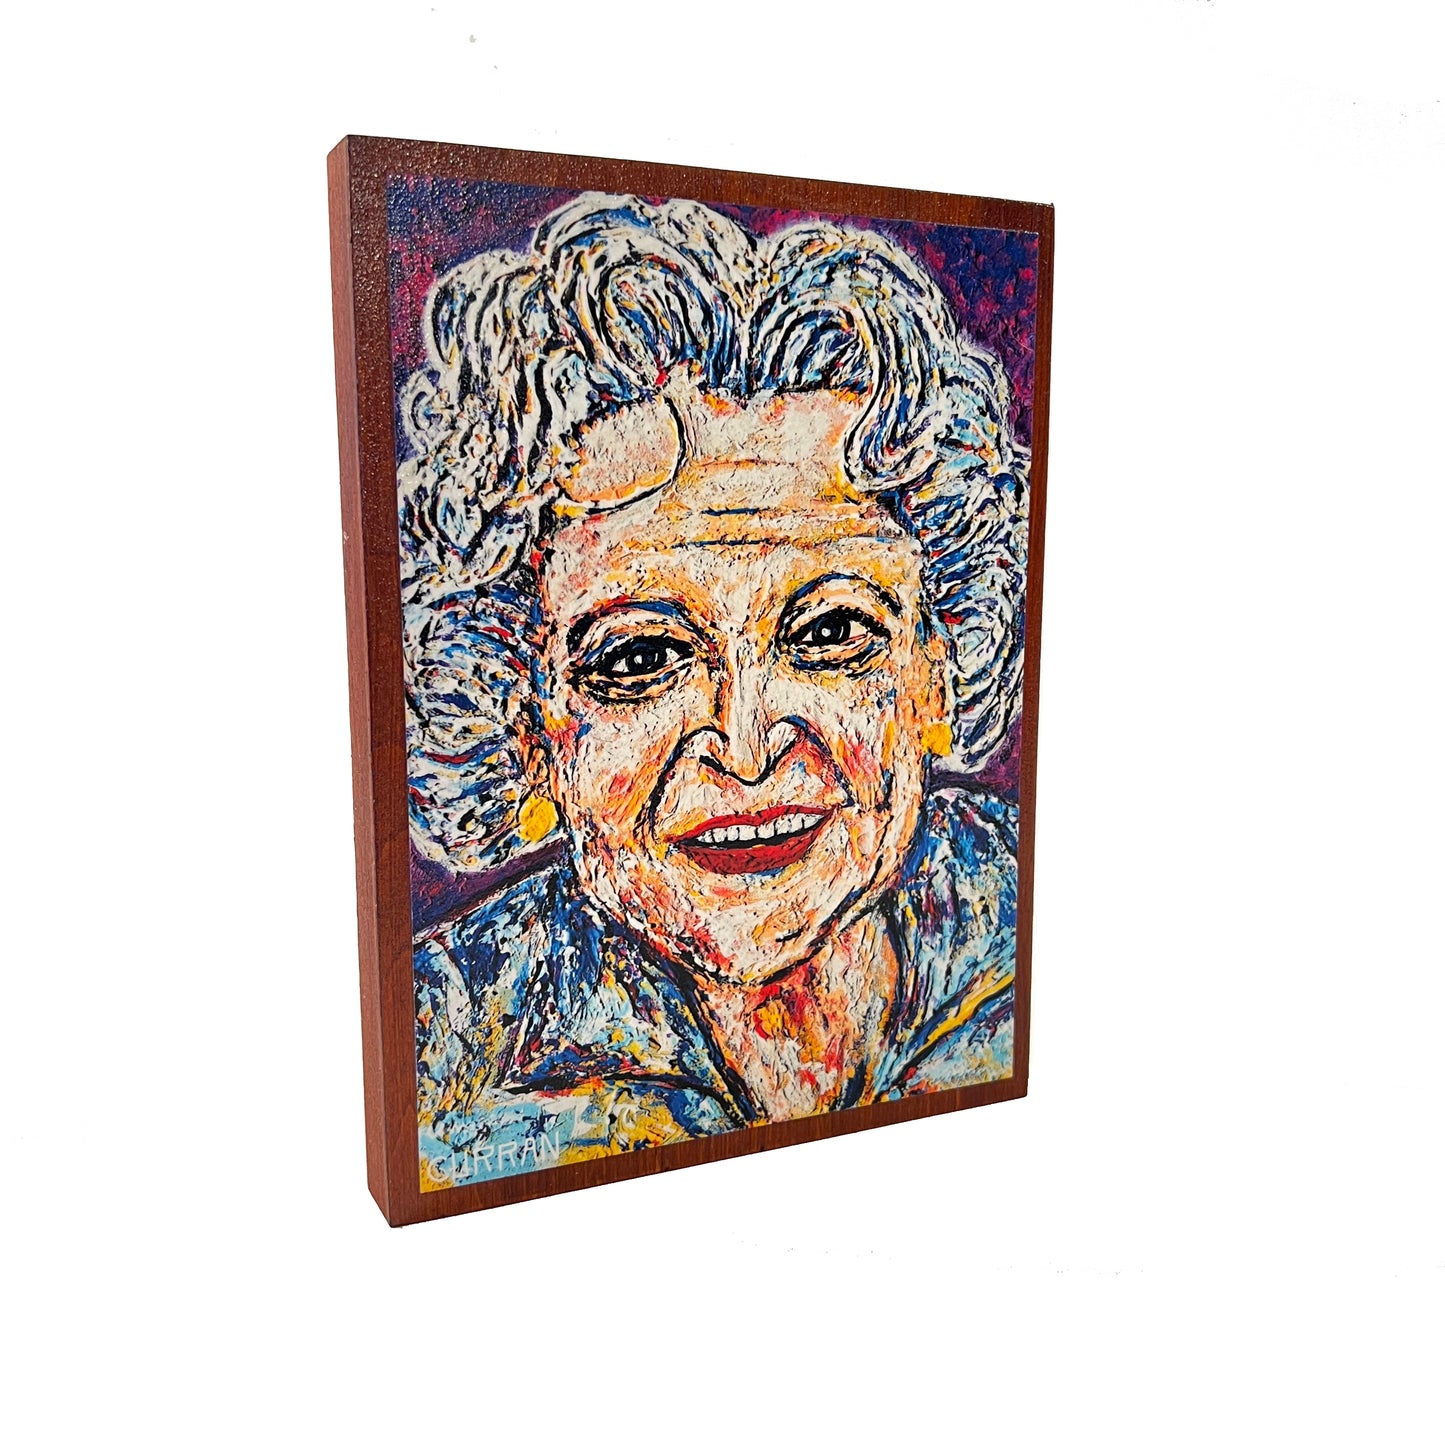 Betty White on wood panel (Limited Edition)